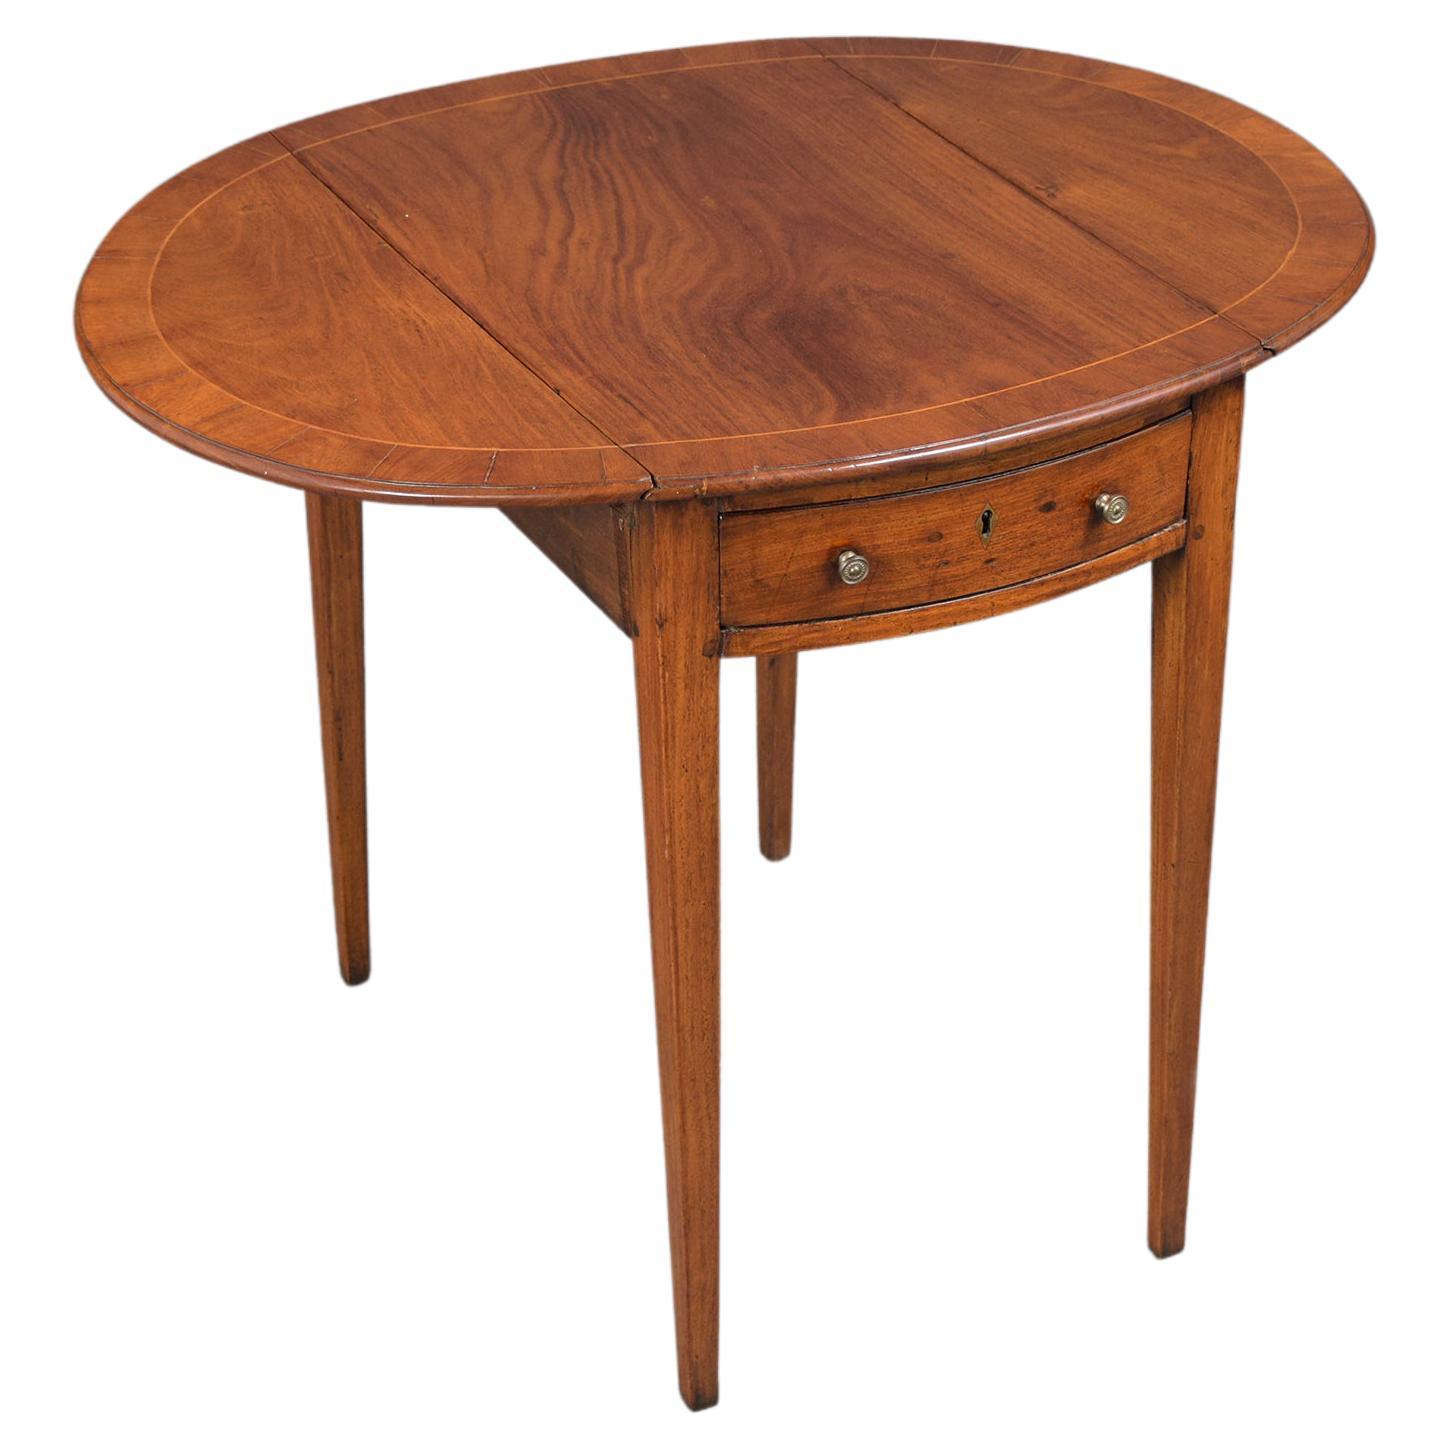 19th Century Cherrywood Antique Pembrook Table with Folding Leaves